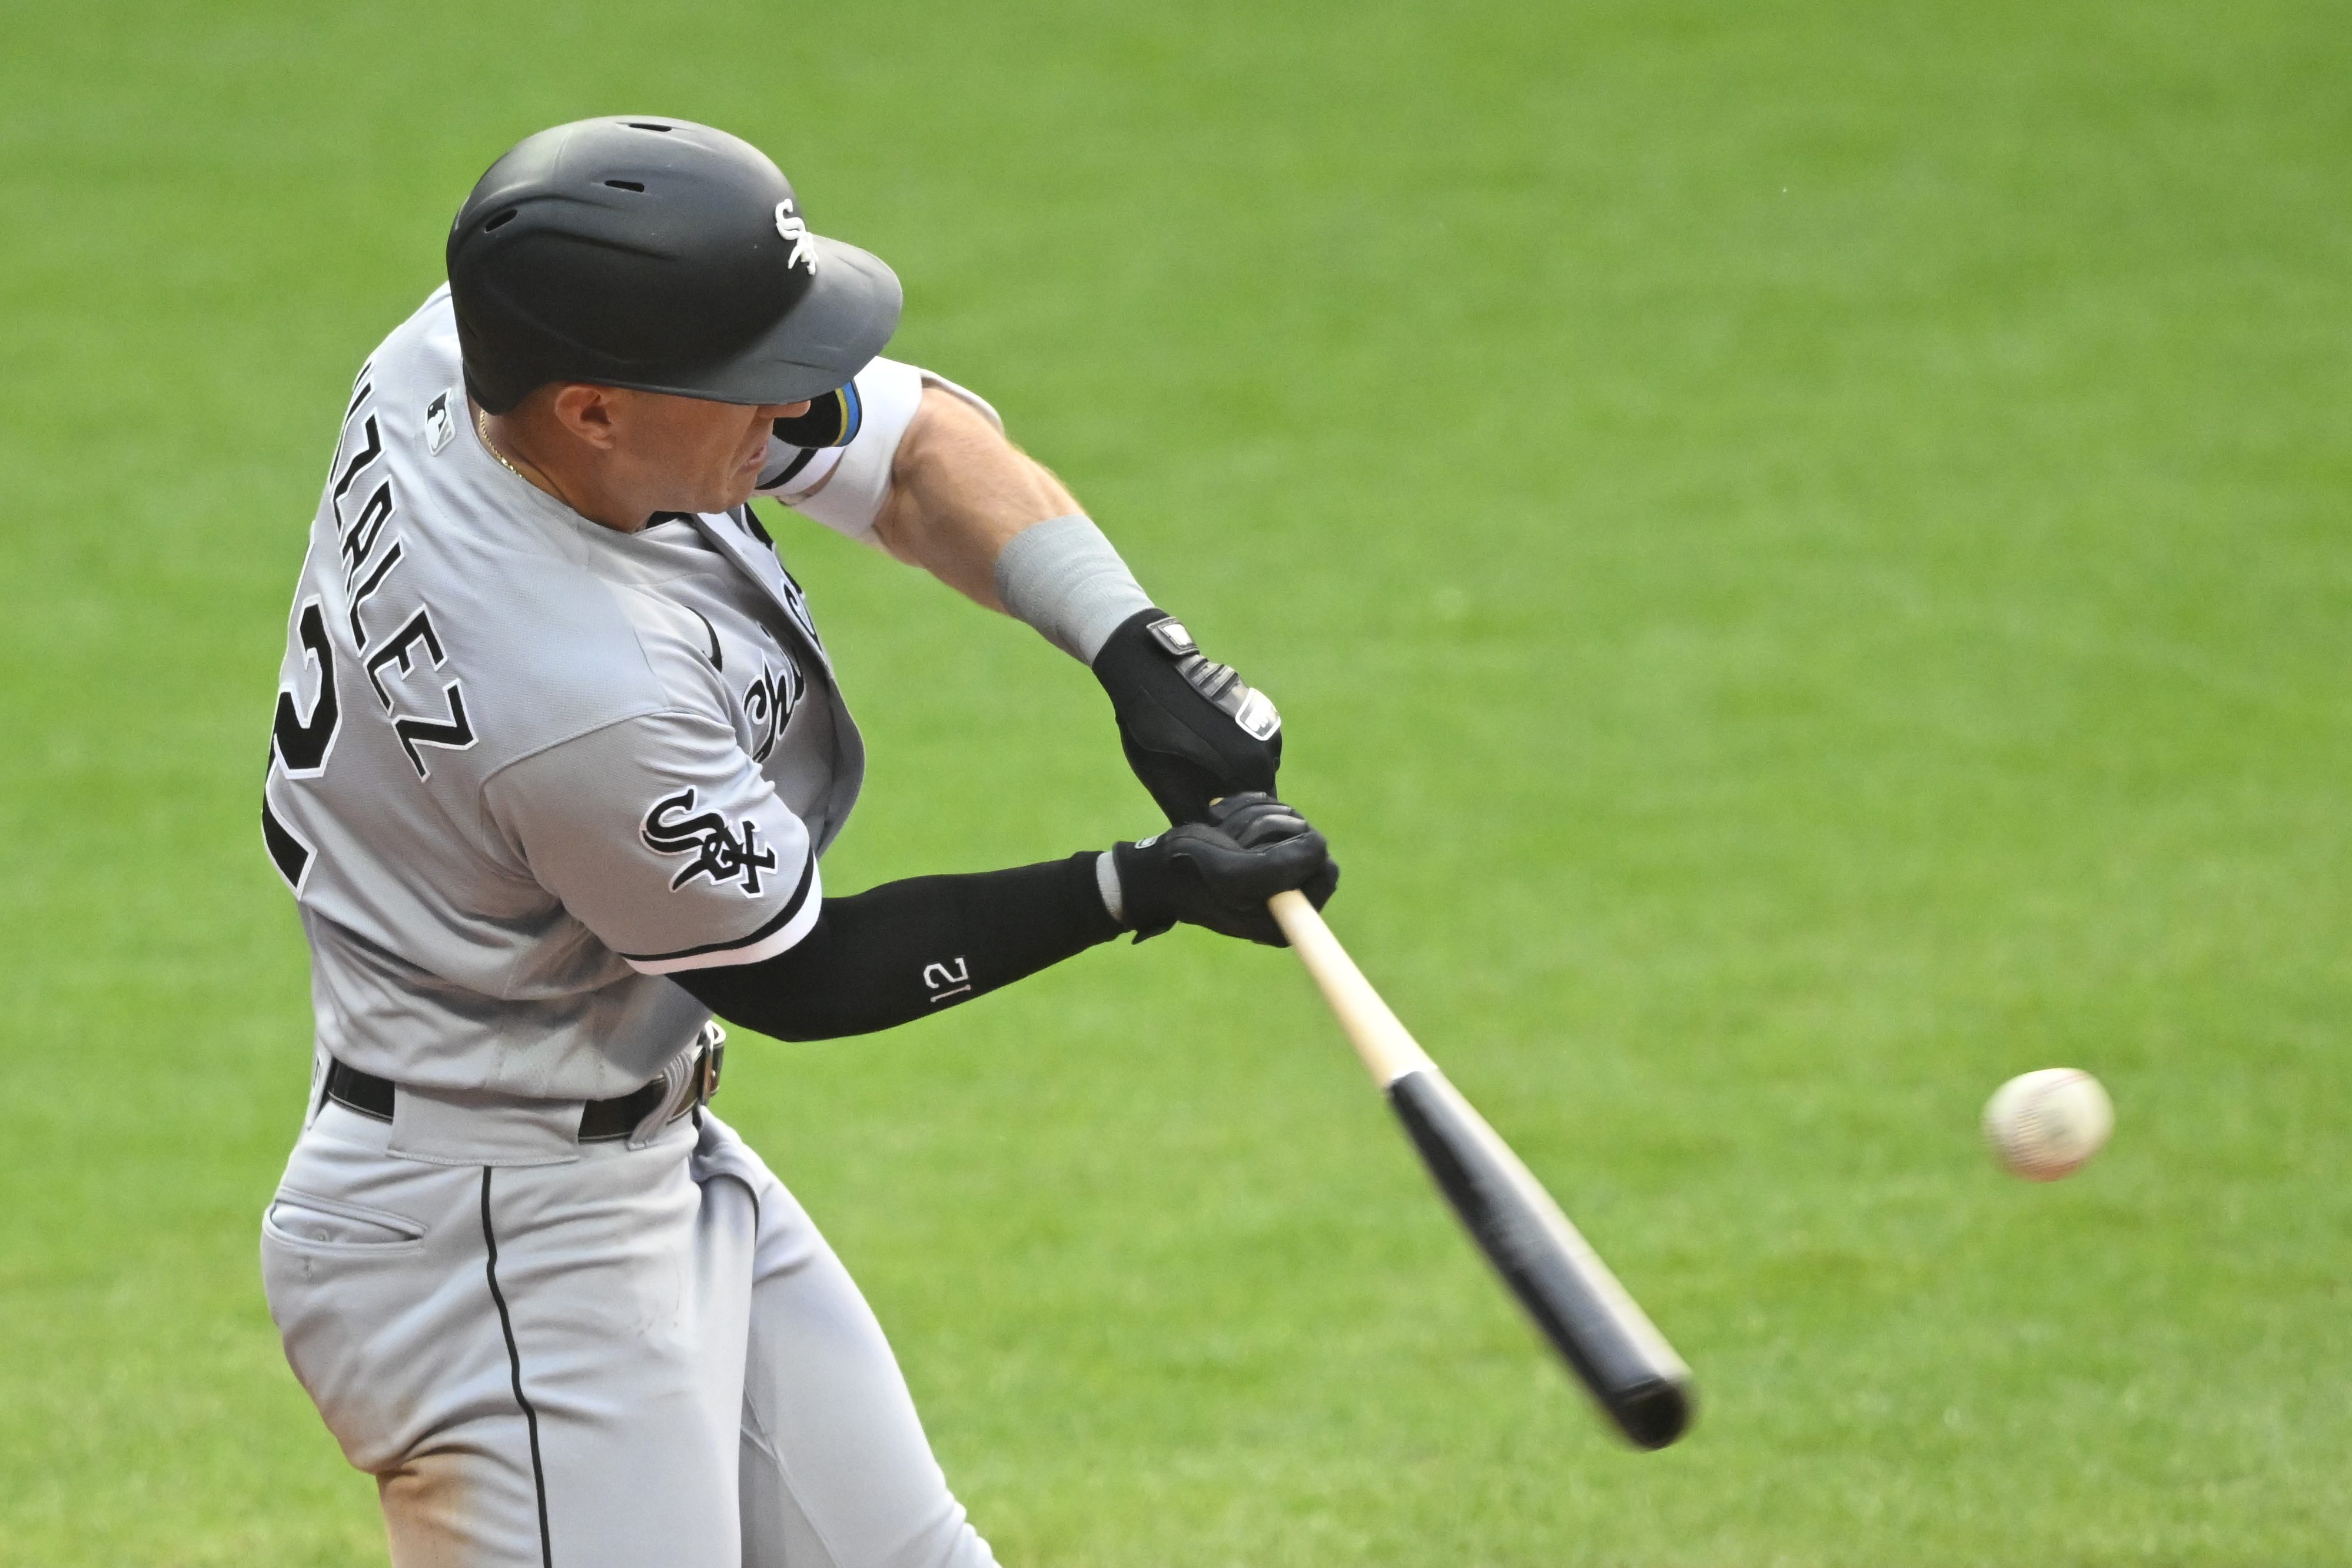 MLB: Chicago White Sox at Cleveland Guardians